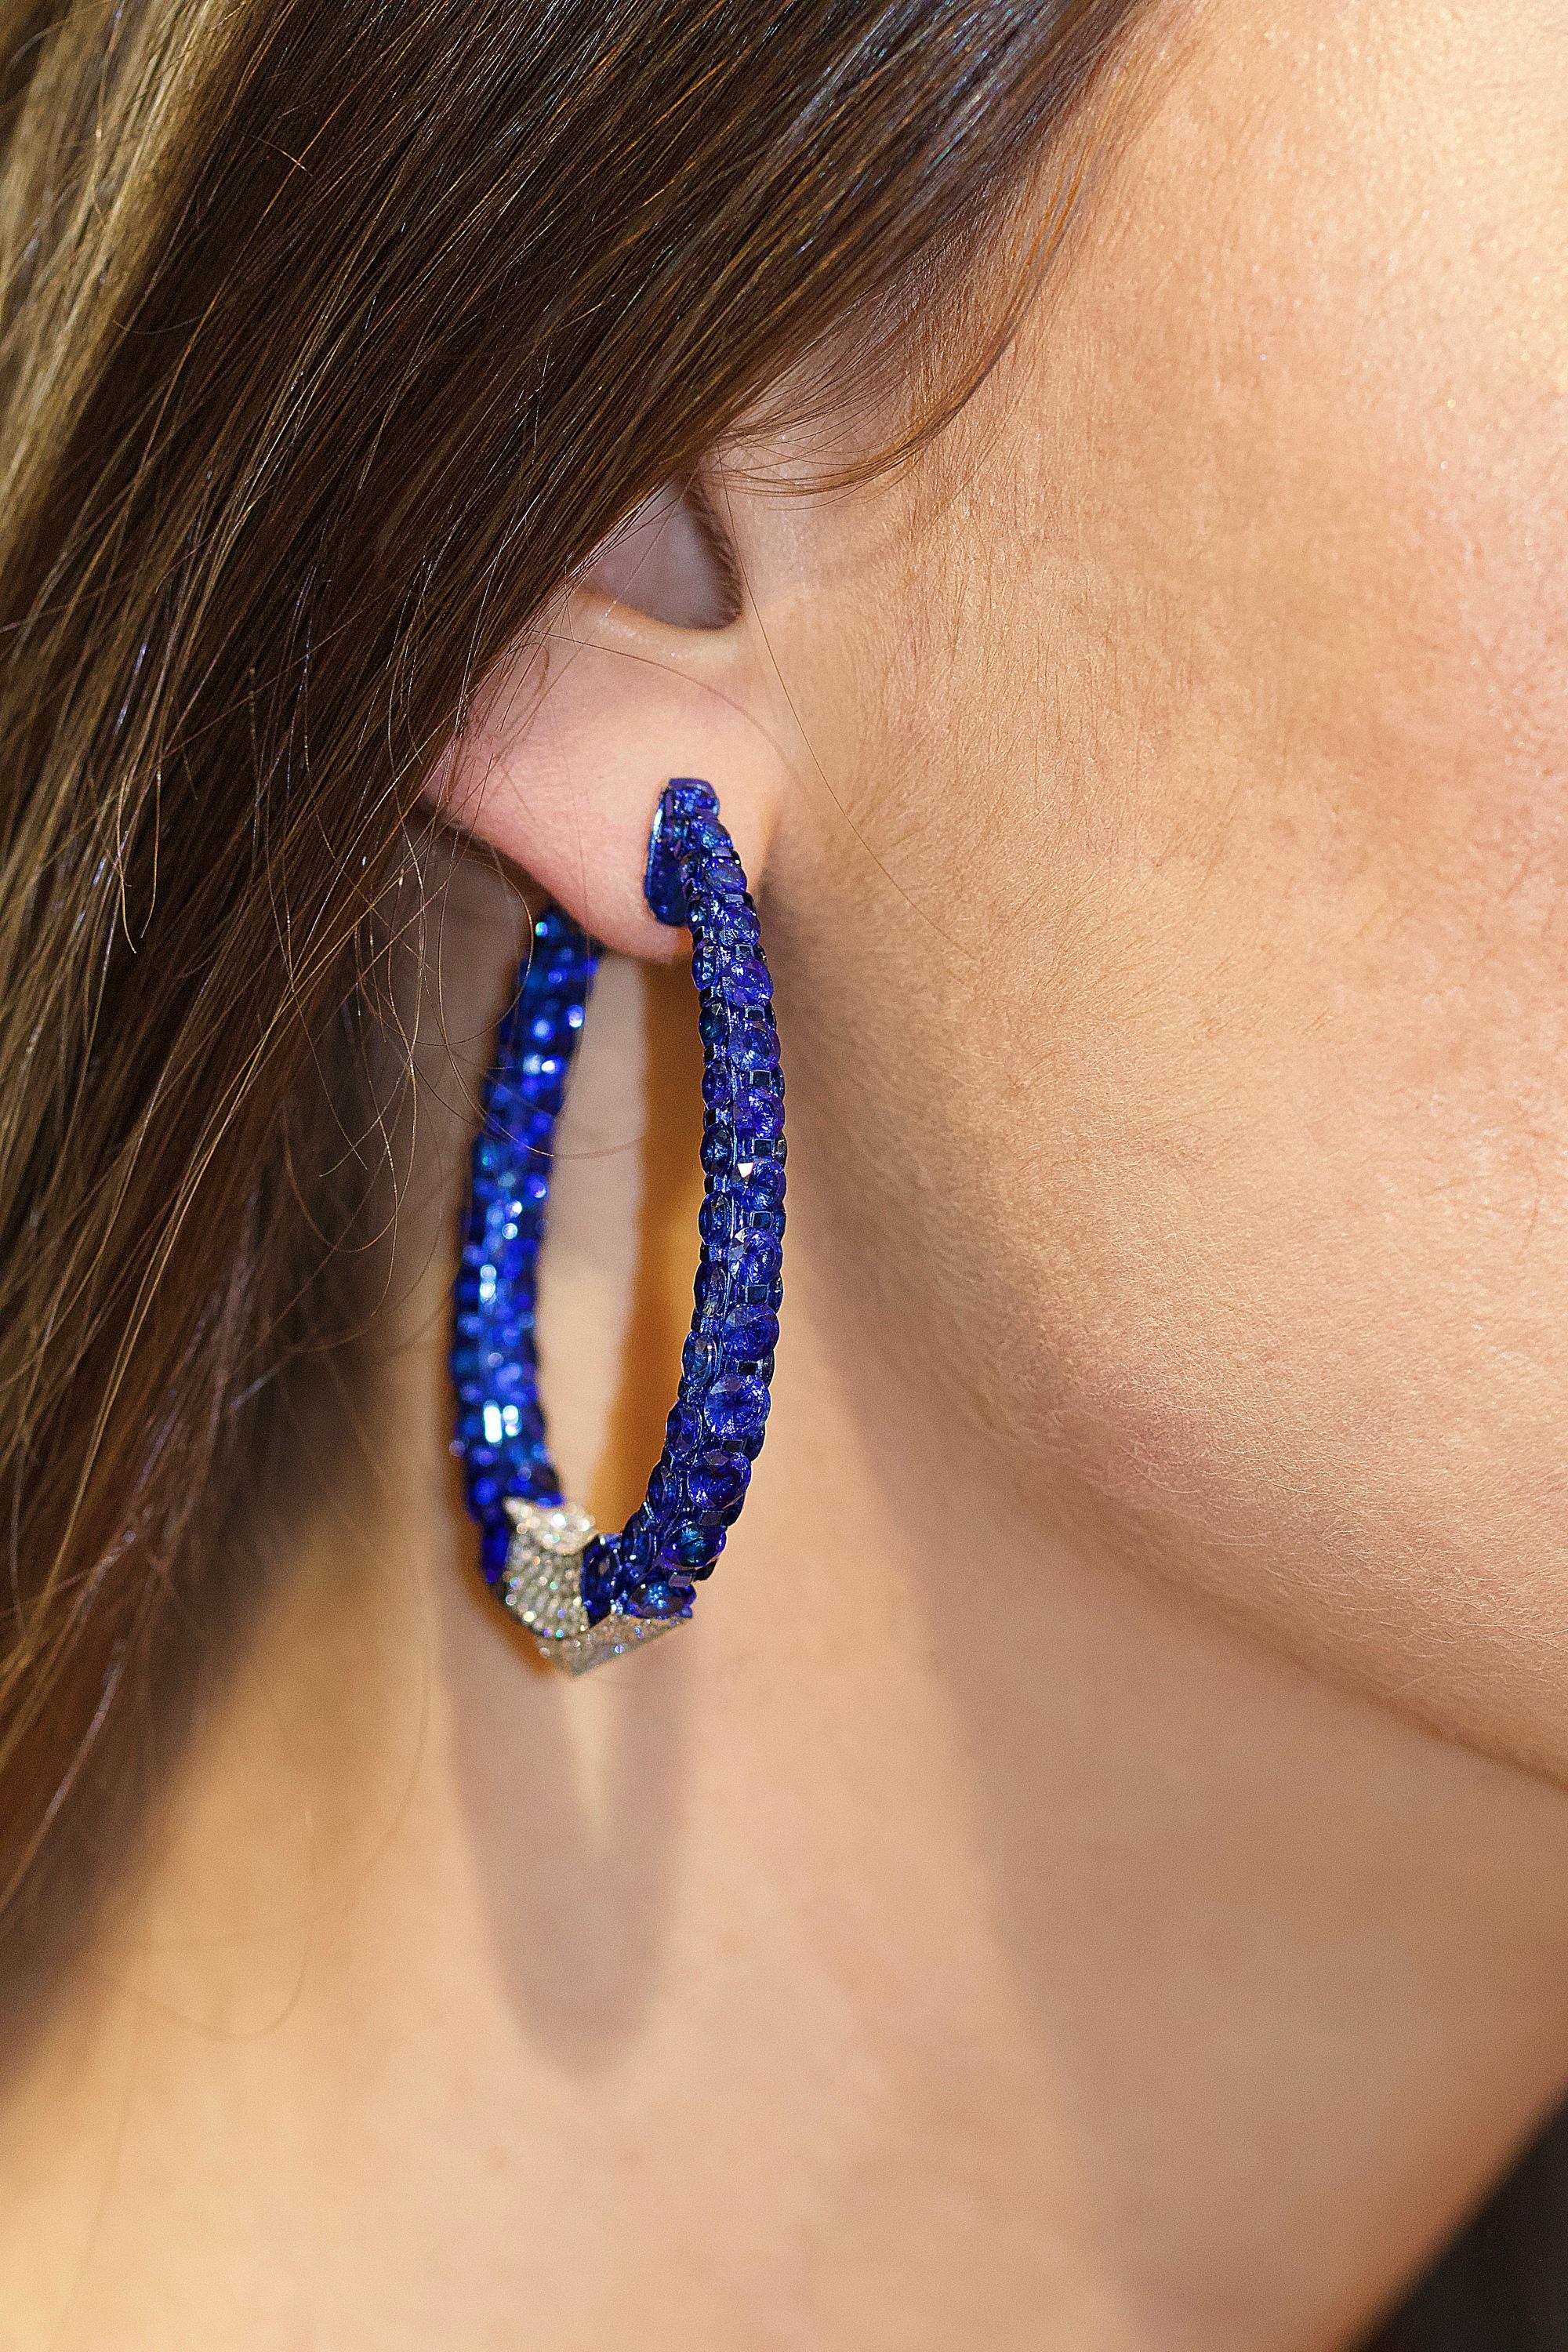 Beautiful Diamond Hoops, These earring are from an New York estate. The craftsman ship is exceptional. The 18k gold metal has a blue rhodium finish on it as well, so all you see is blue, blue, blue. It is so LUX and cool. The earrings have over 38